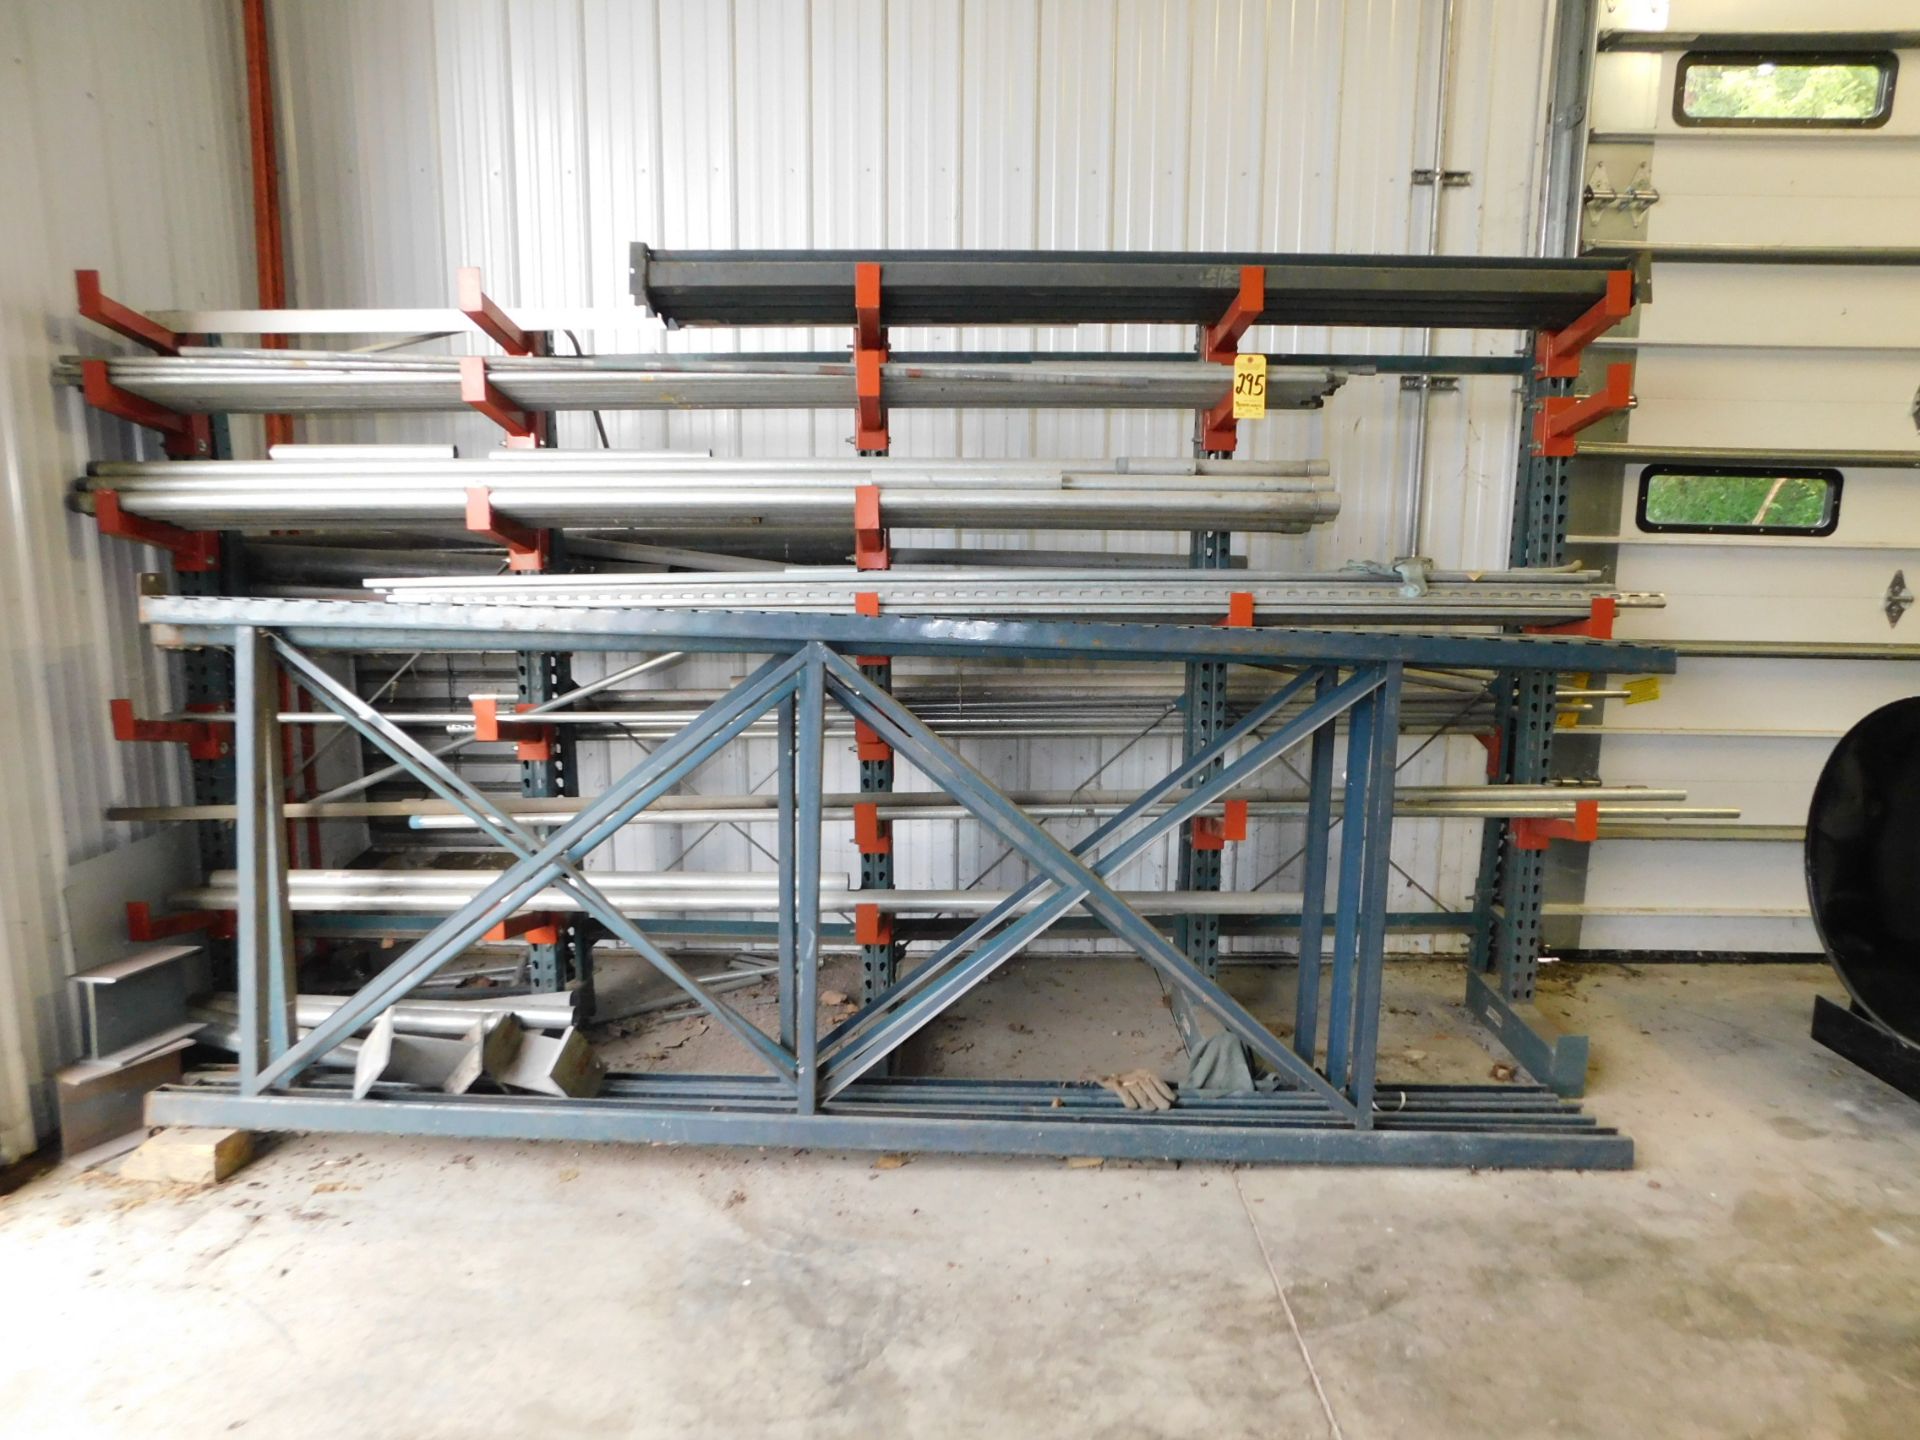 2 Sided Cantilever Pipe Storage Rack +contents6'6"HX12'WX3'Front to Back, Contents Include (3)